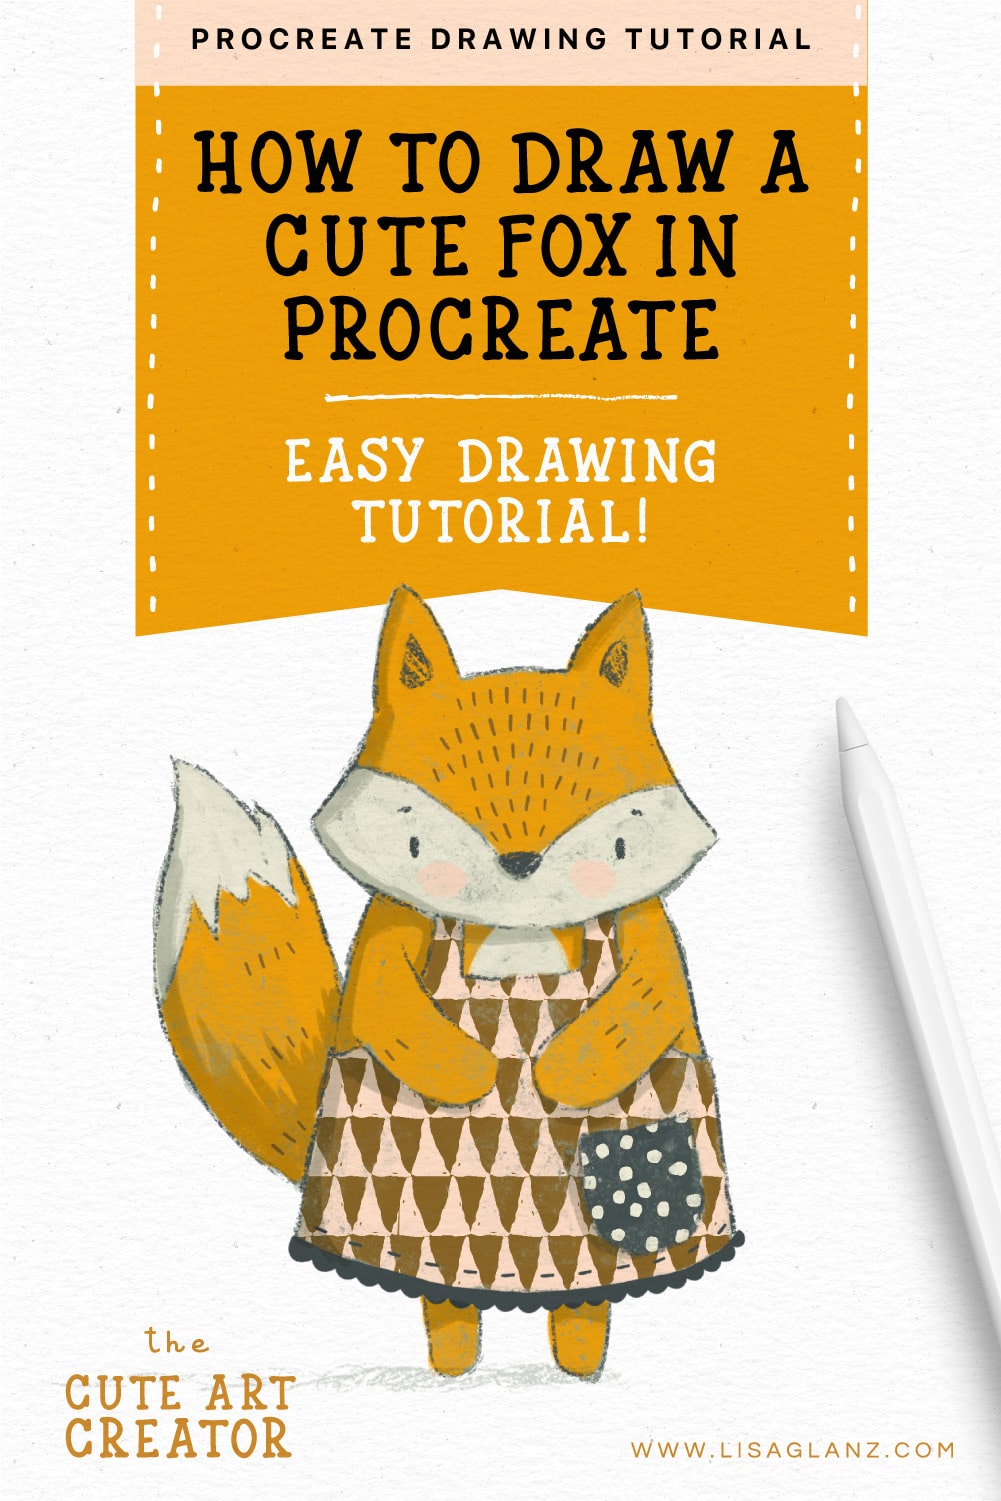 How to paint a cute fox in Procreate – easy digital drawing tutorial